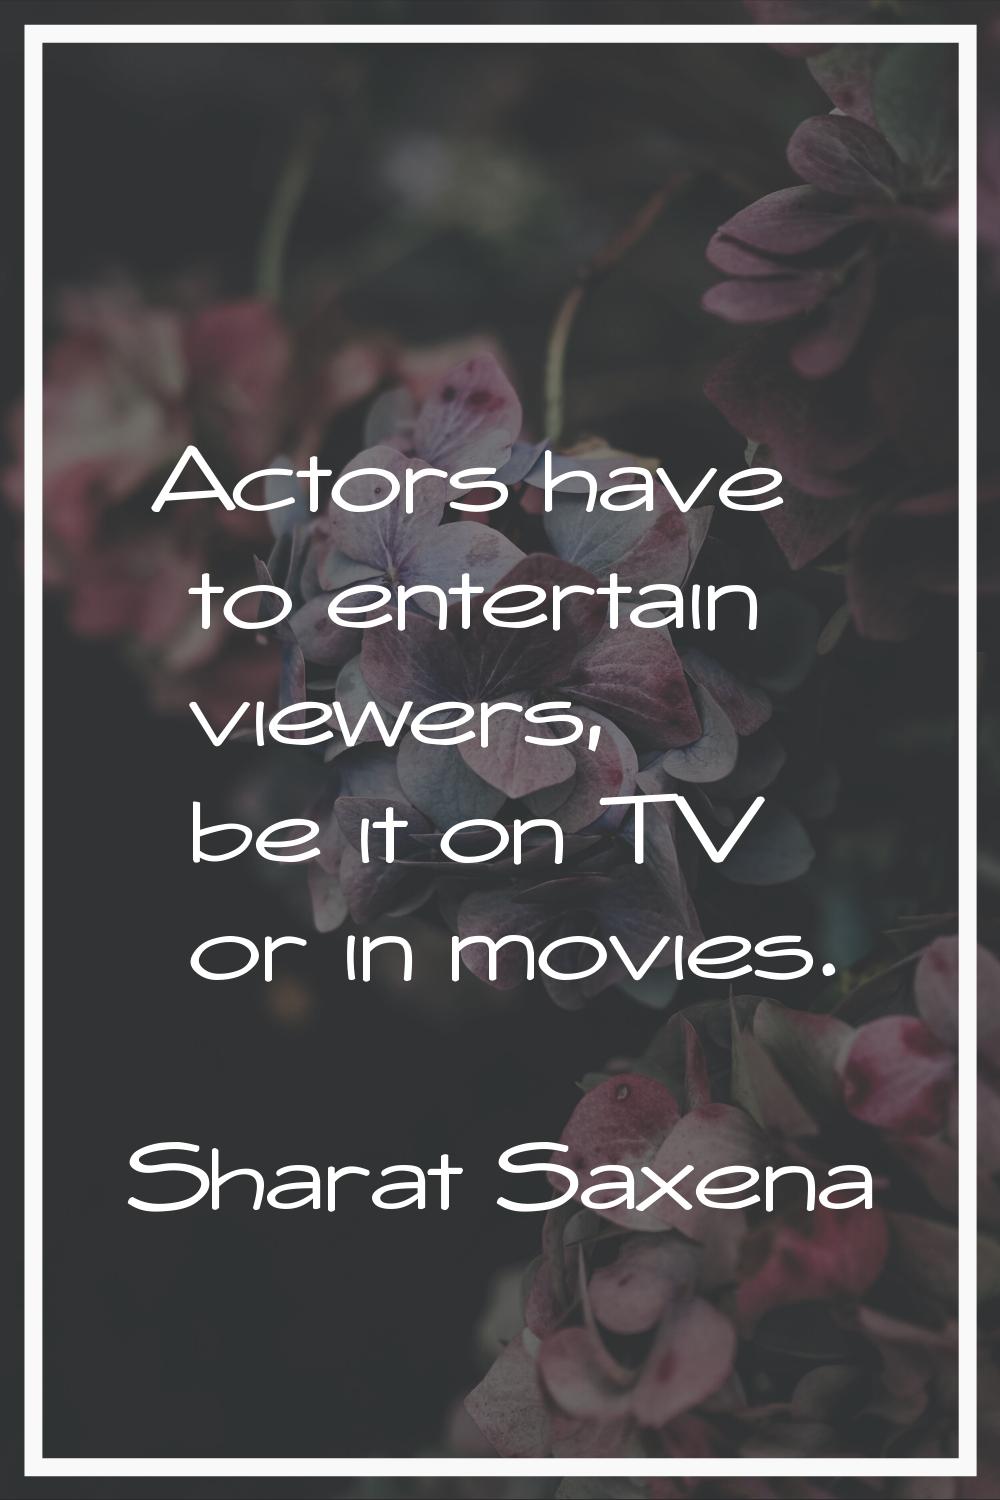 Actors have to entertain viewers, be it on TV or in movies.